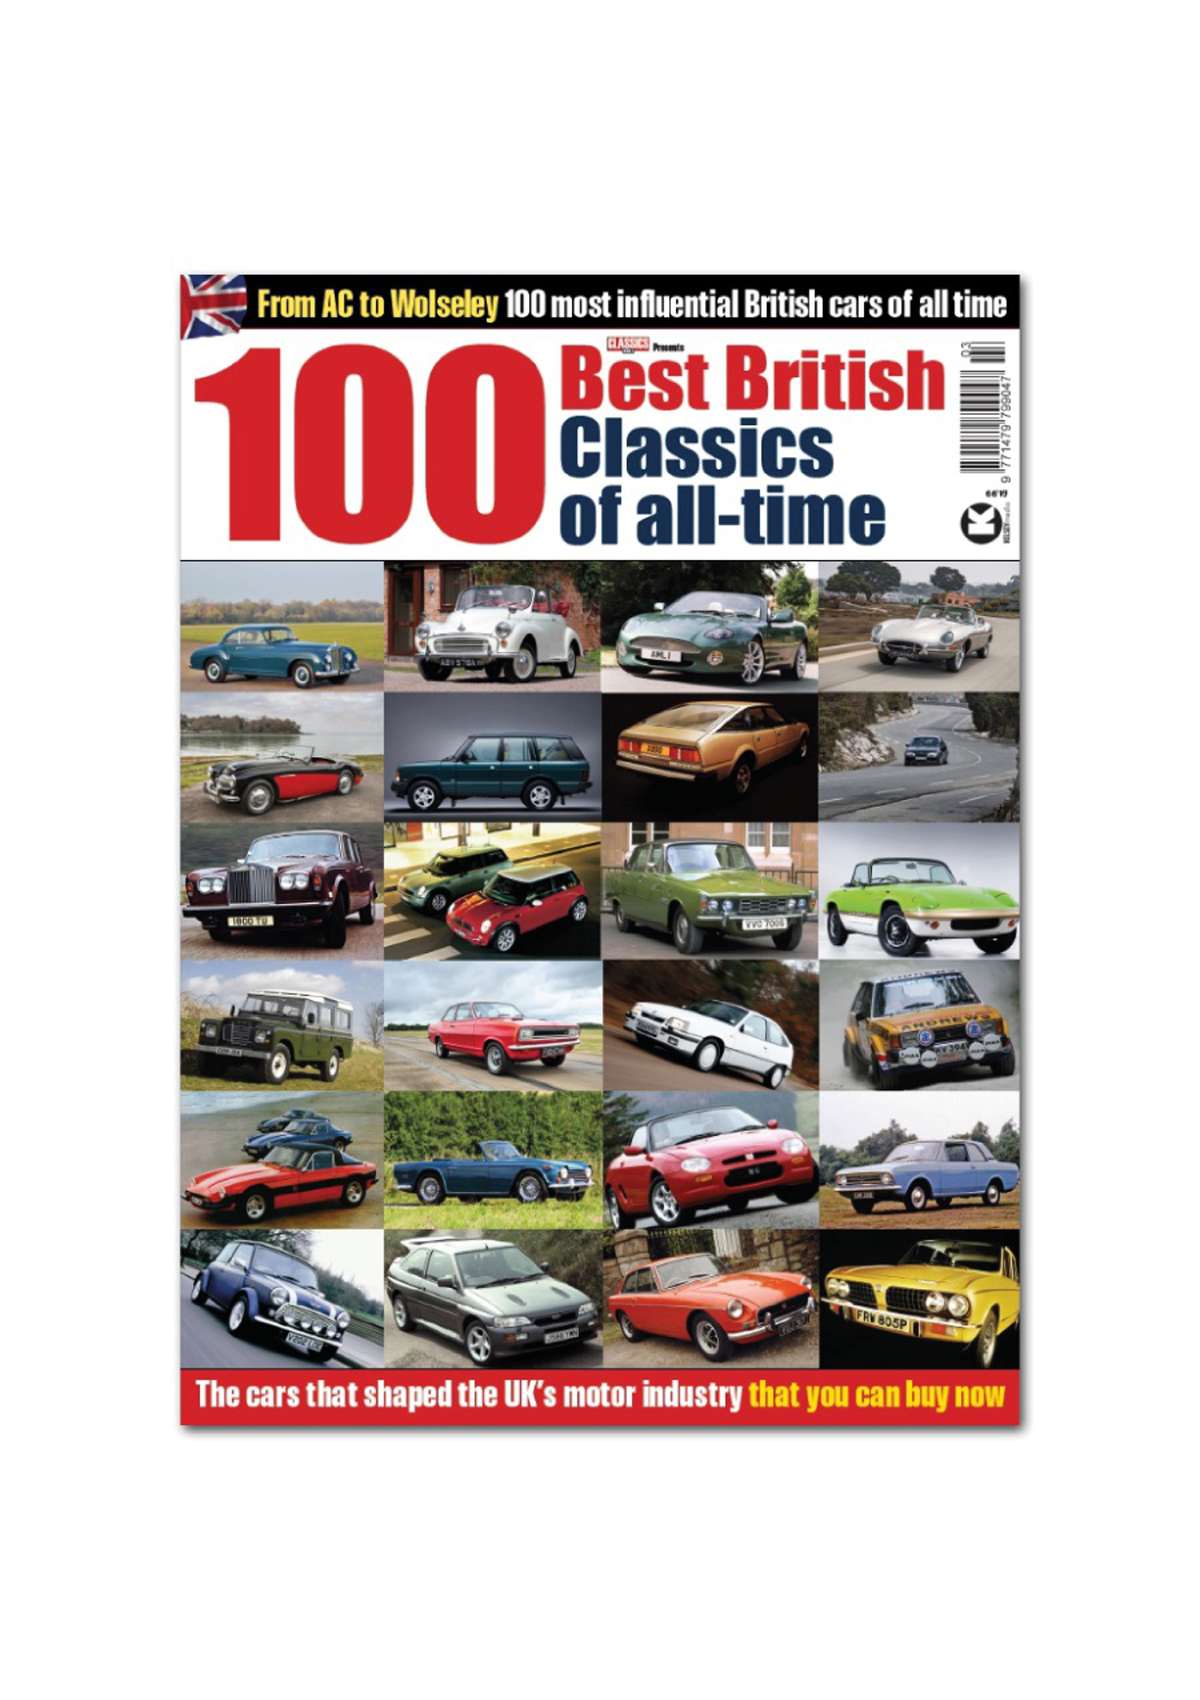 9047 - 100 Best British Classics of all-time
